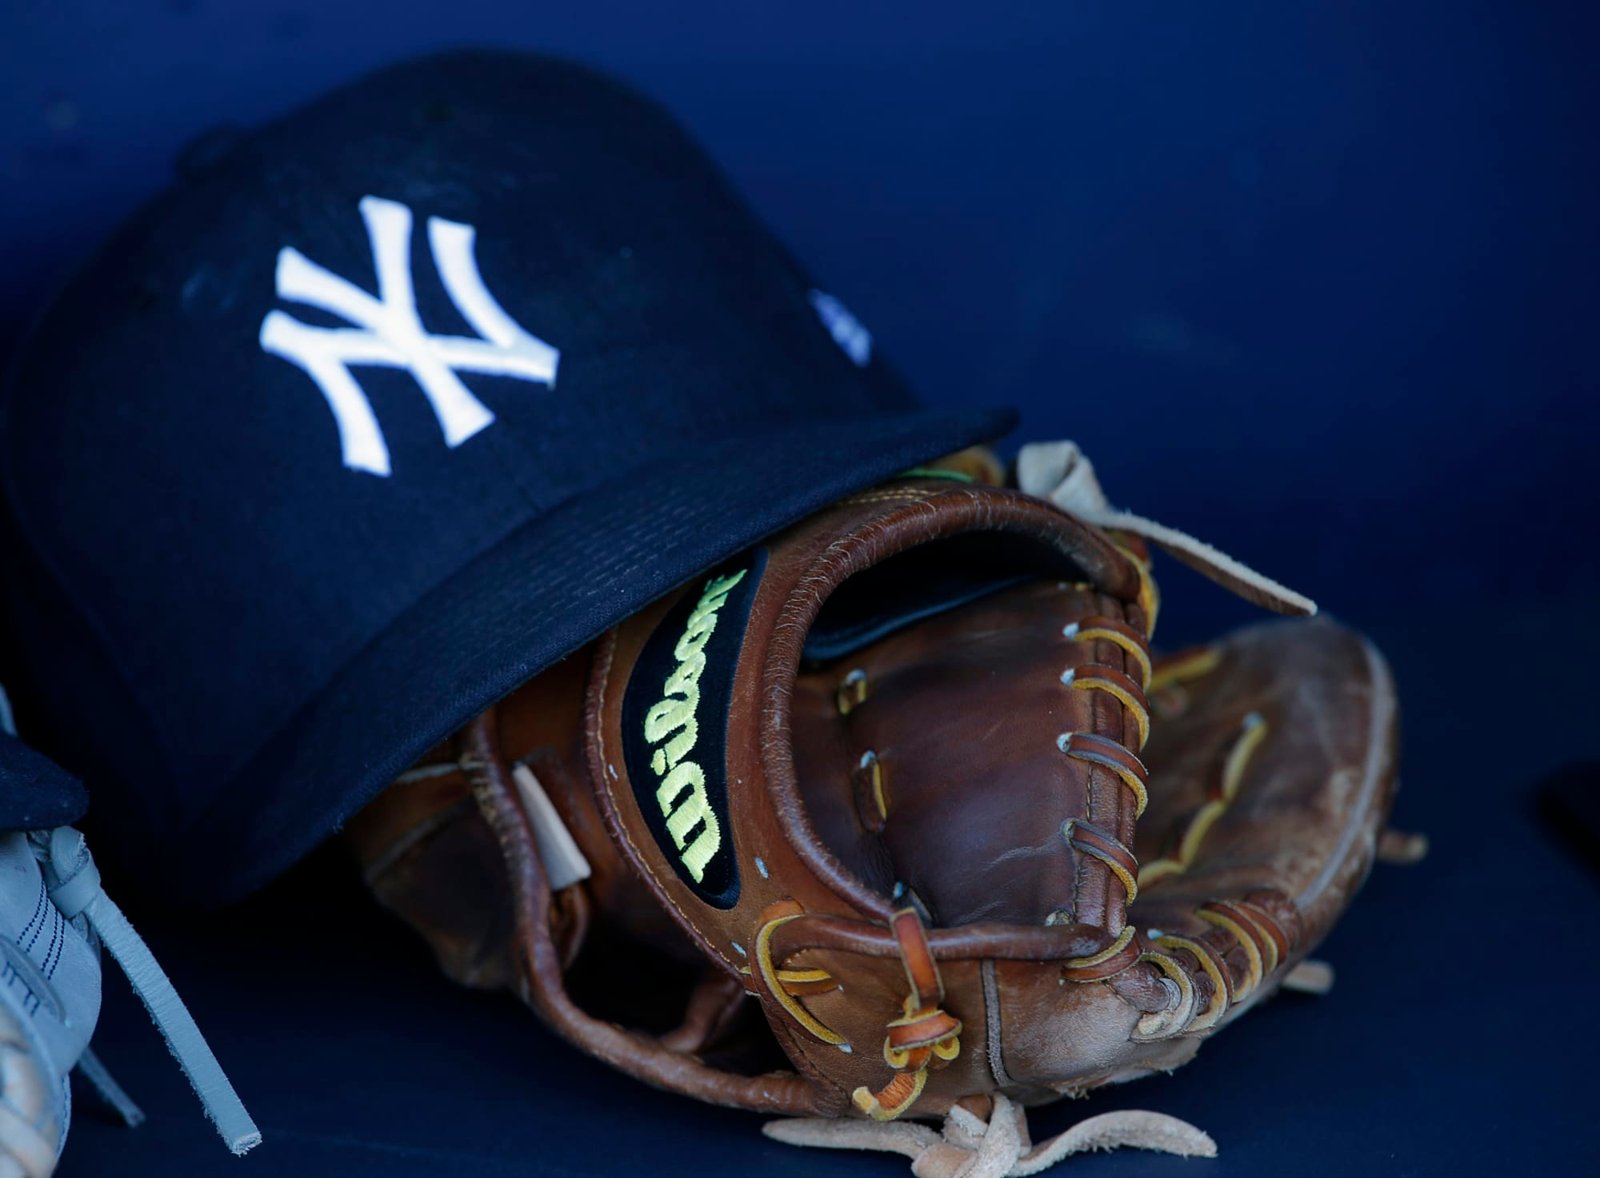 Next 3 New York Yankees prospects we should expect to get promoted